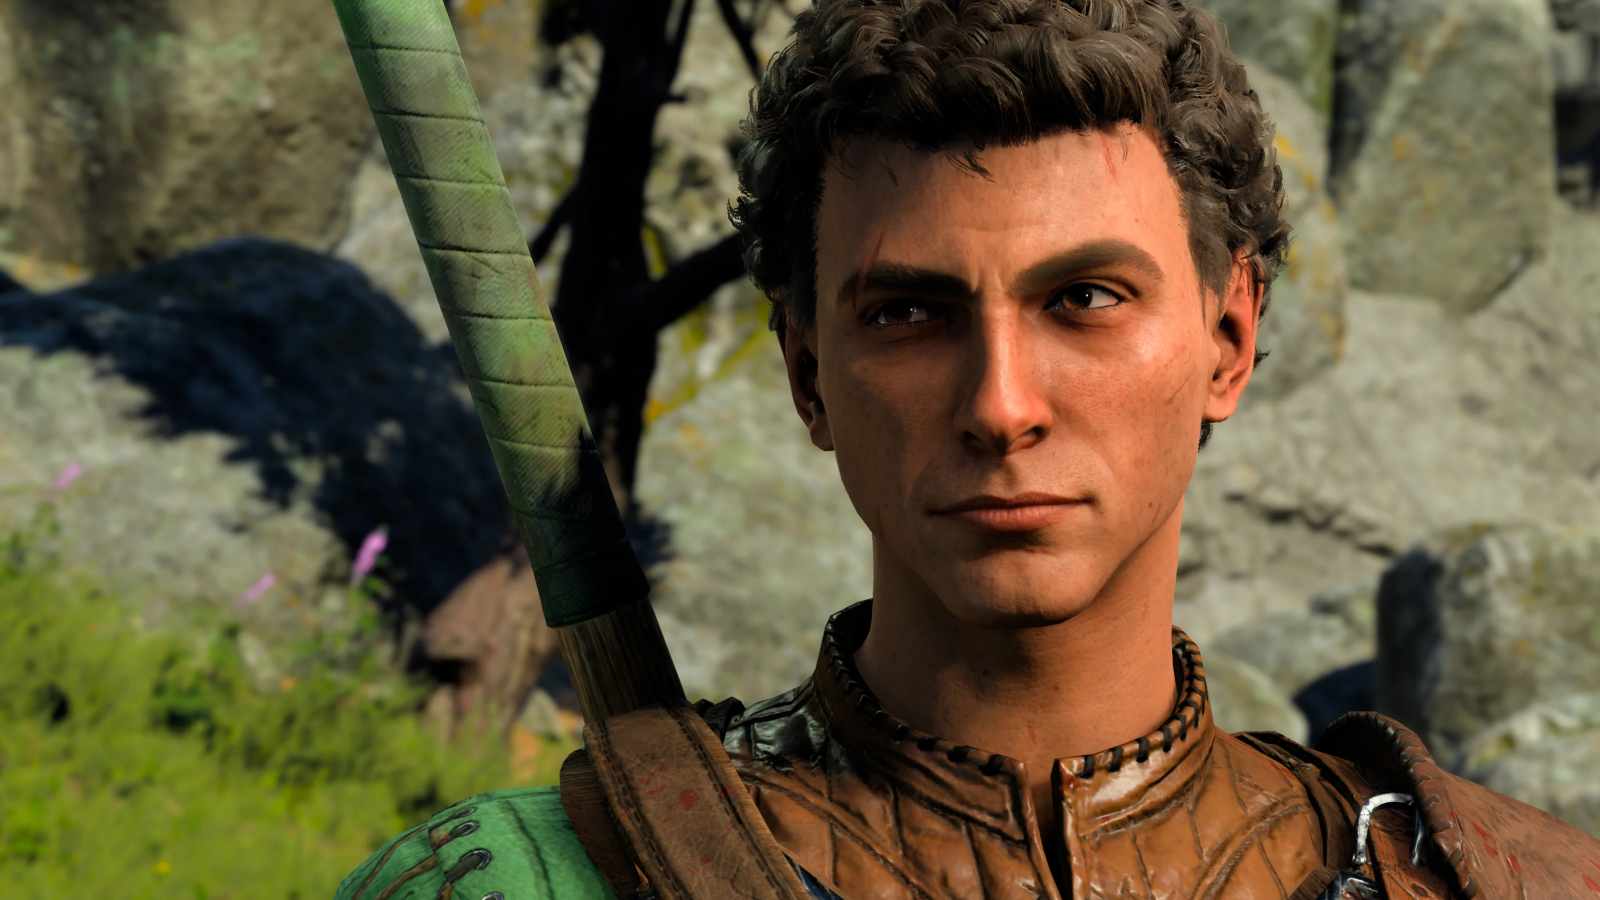 Baldur’s Gate 3 players are divided over whether Aradin deserves sympathy